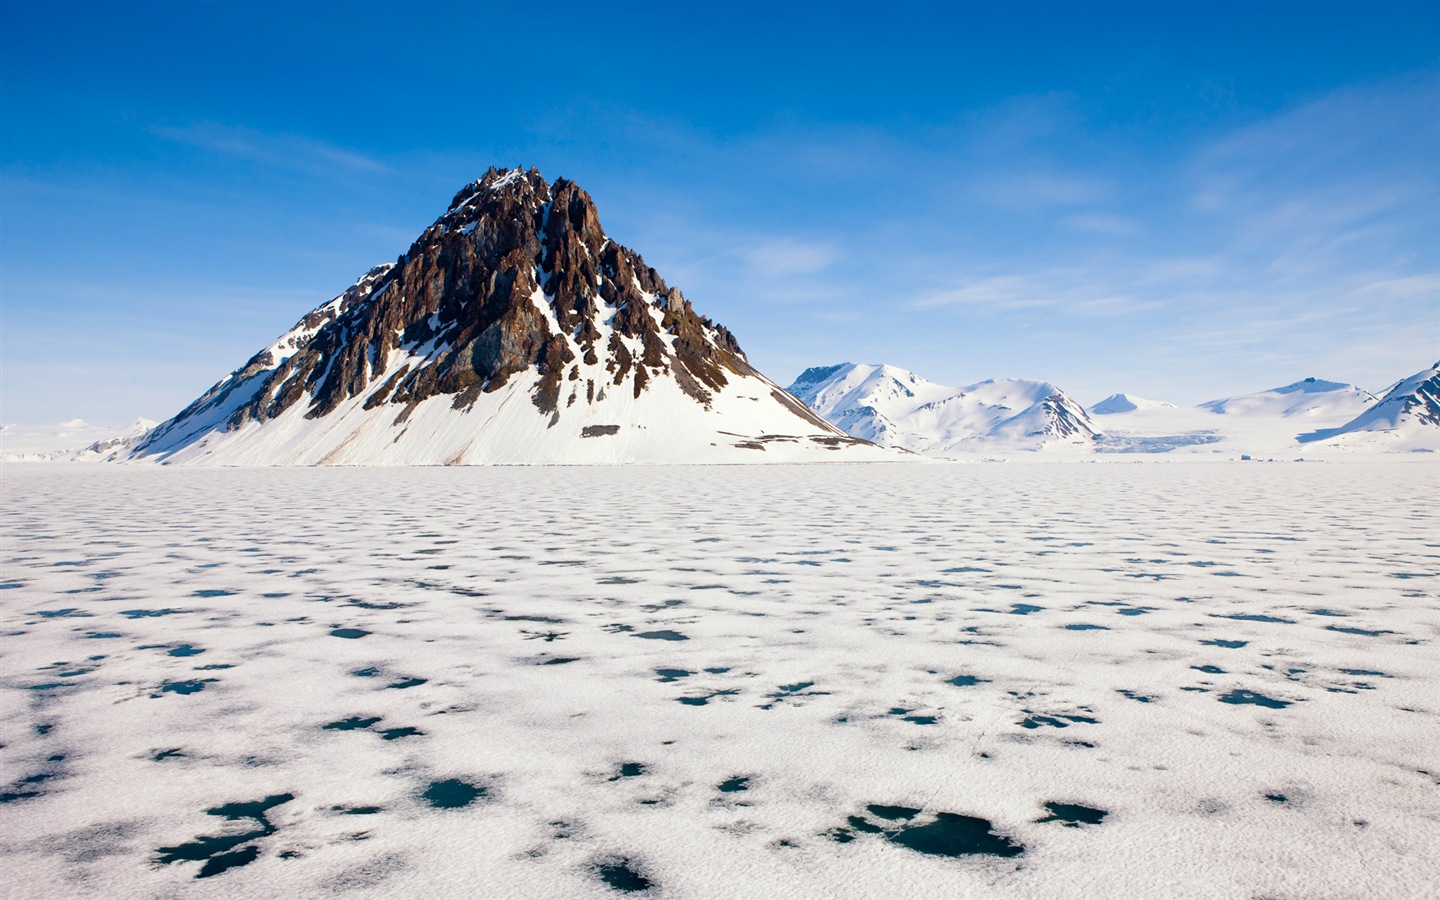 Windows 8 Wallpapers: Arctic, the nature ecological landscape, arctic animals #1 - 1440x900